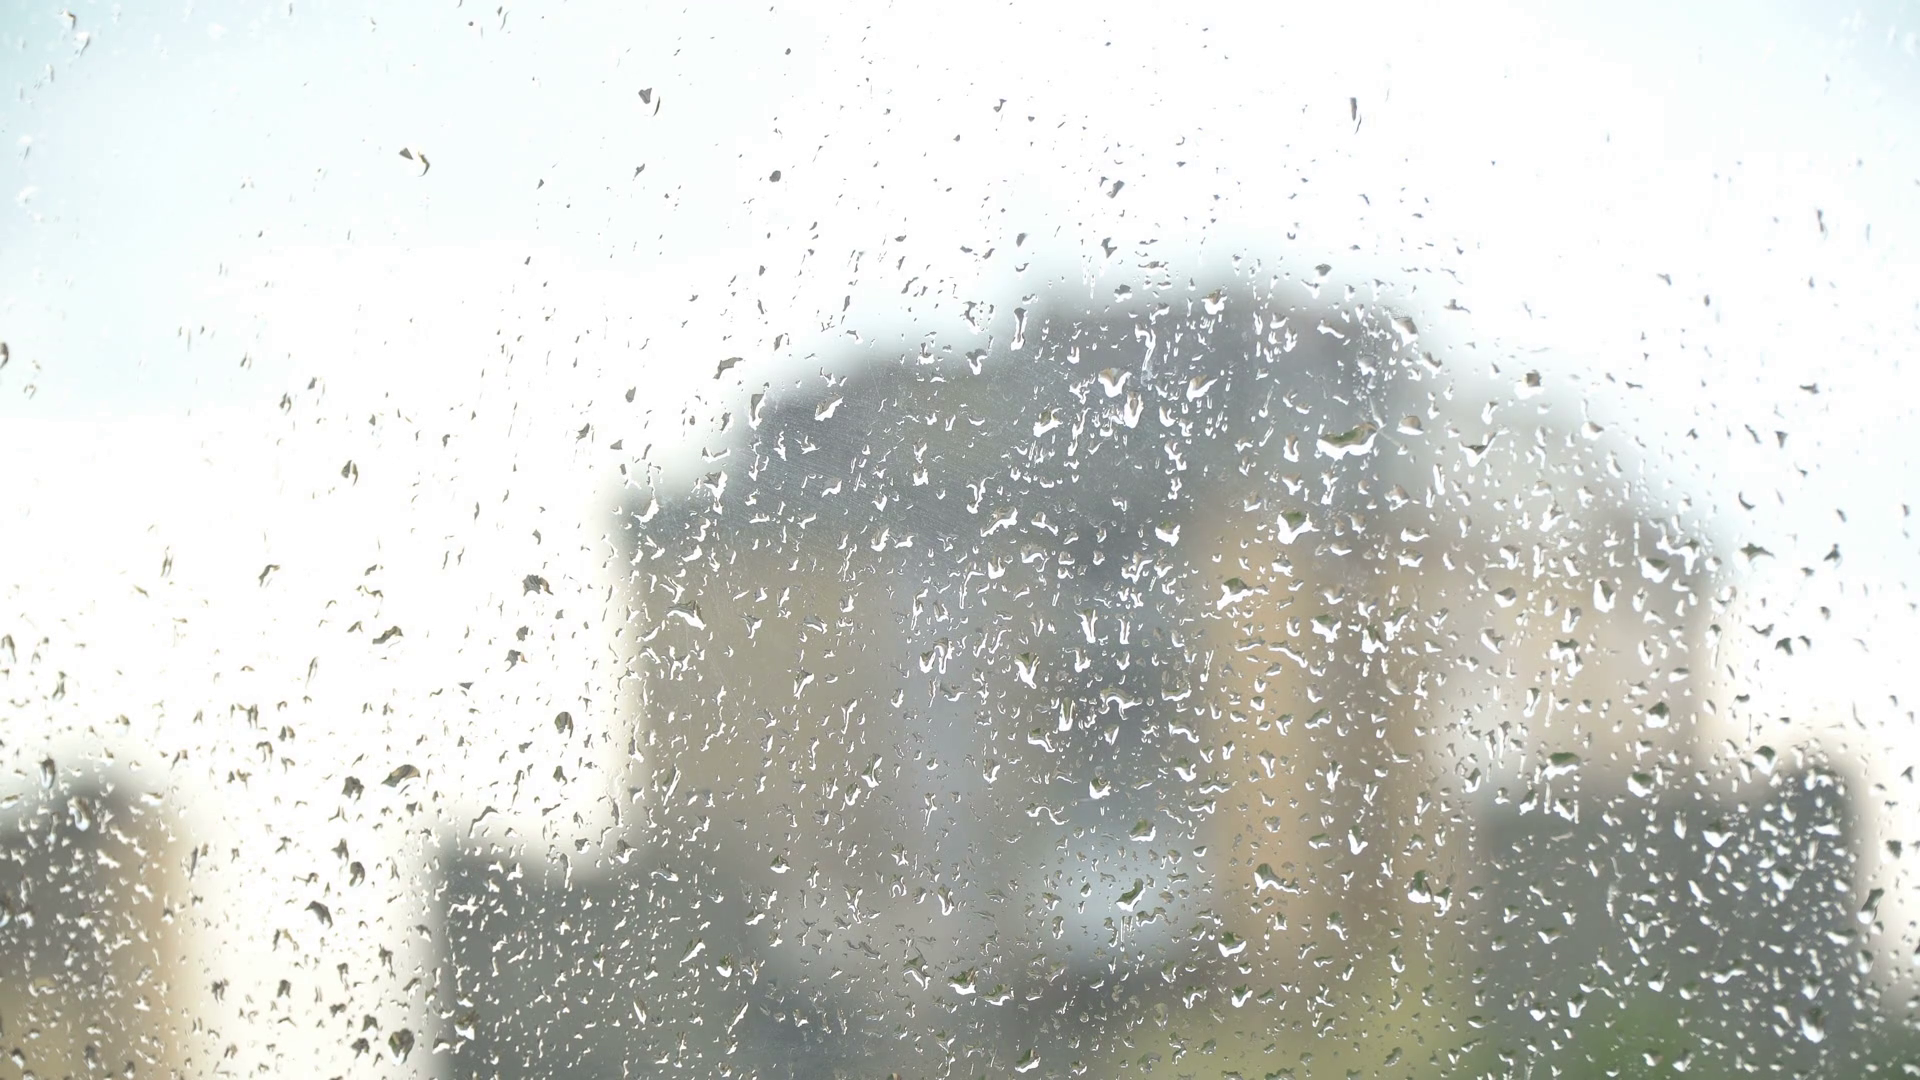 Rainy Day Rain Drops On The Window Dull Residential Building And